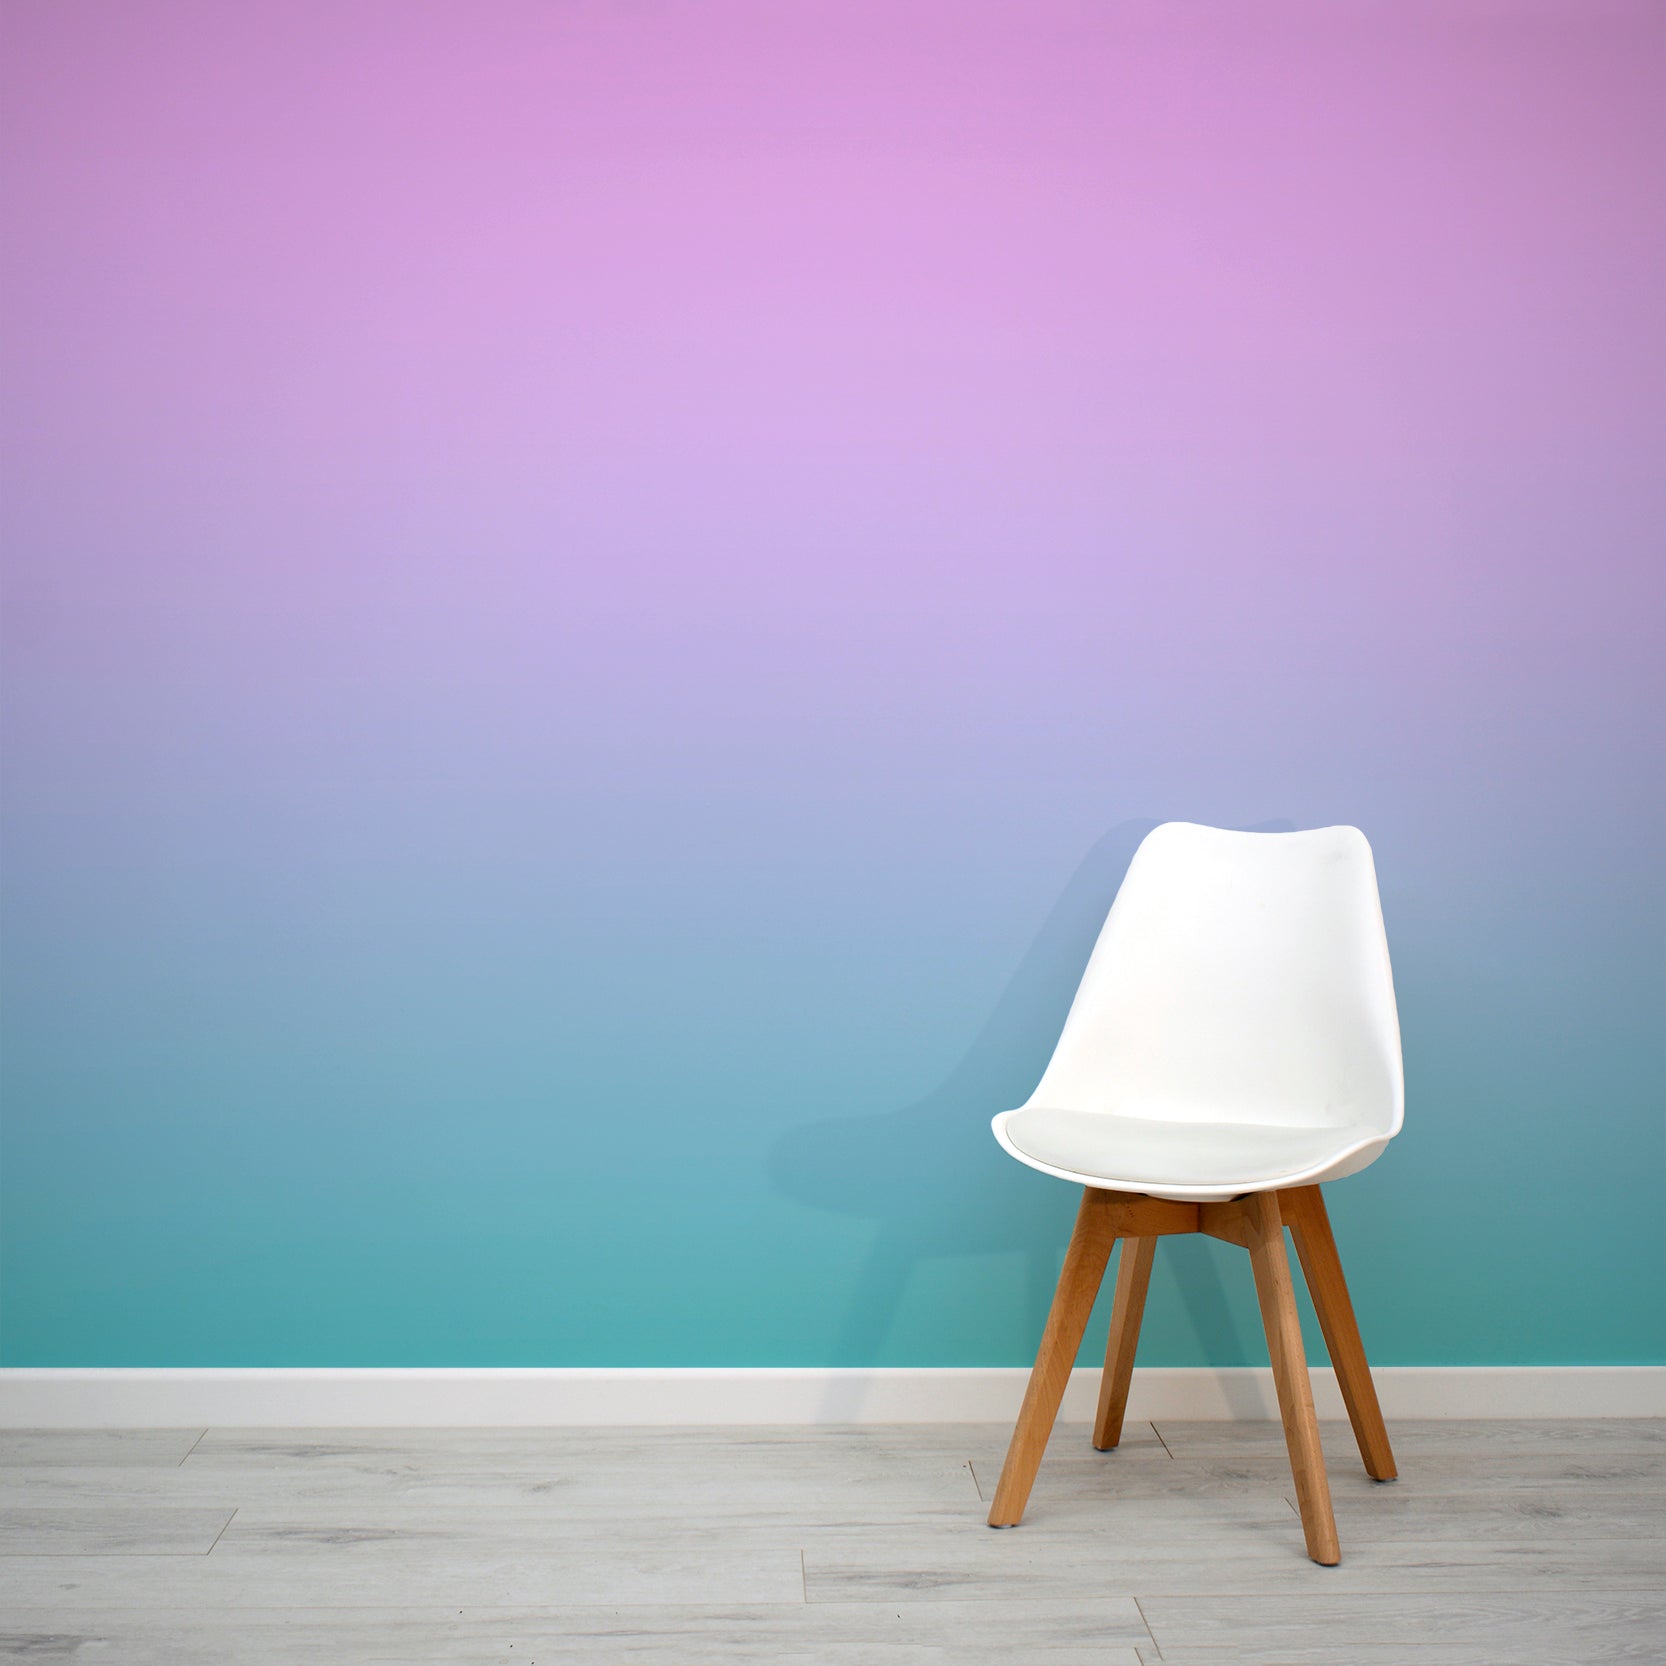 Compto Teal to Pink Colour Gradient Wallpaper Mural 